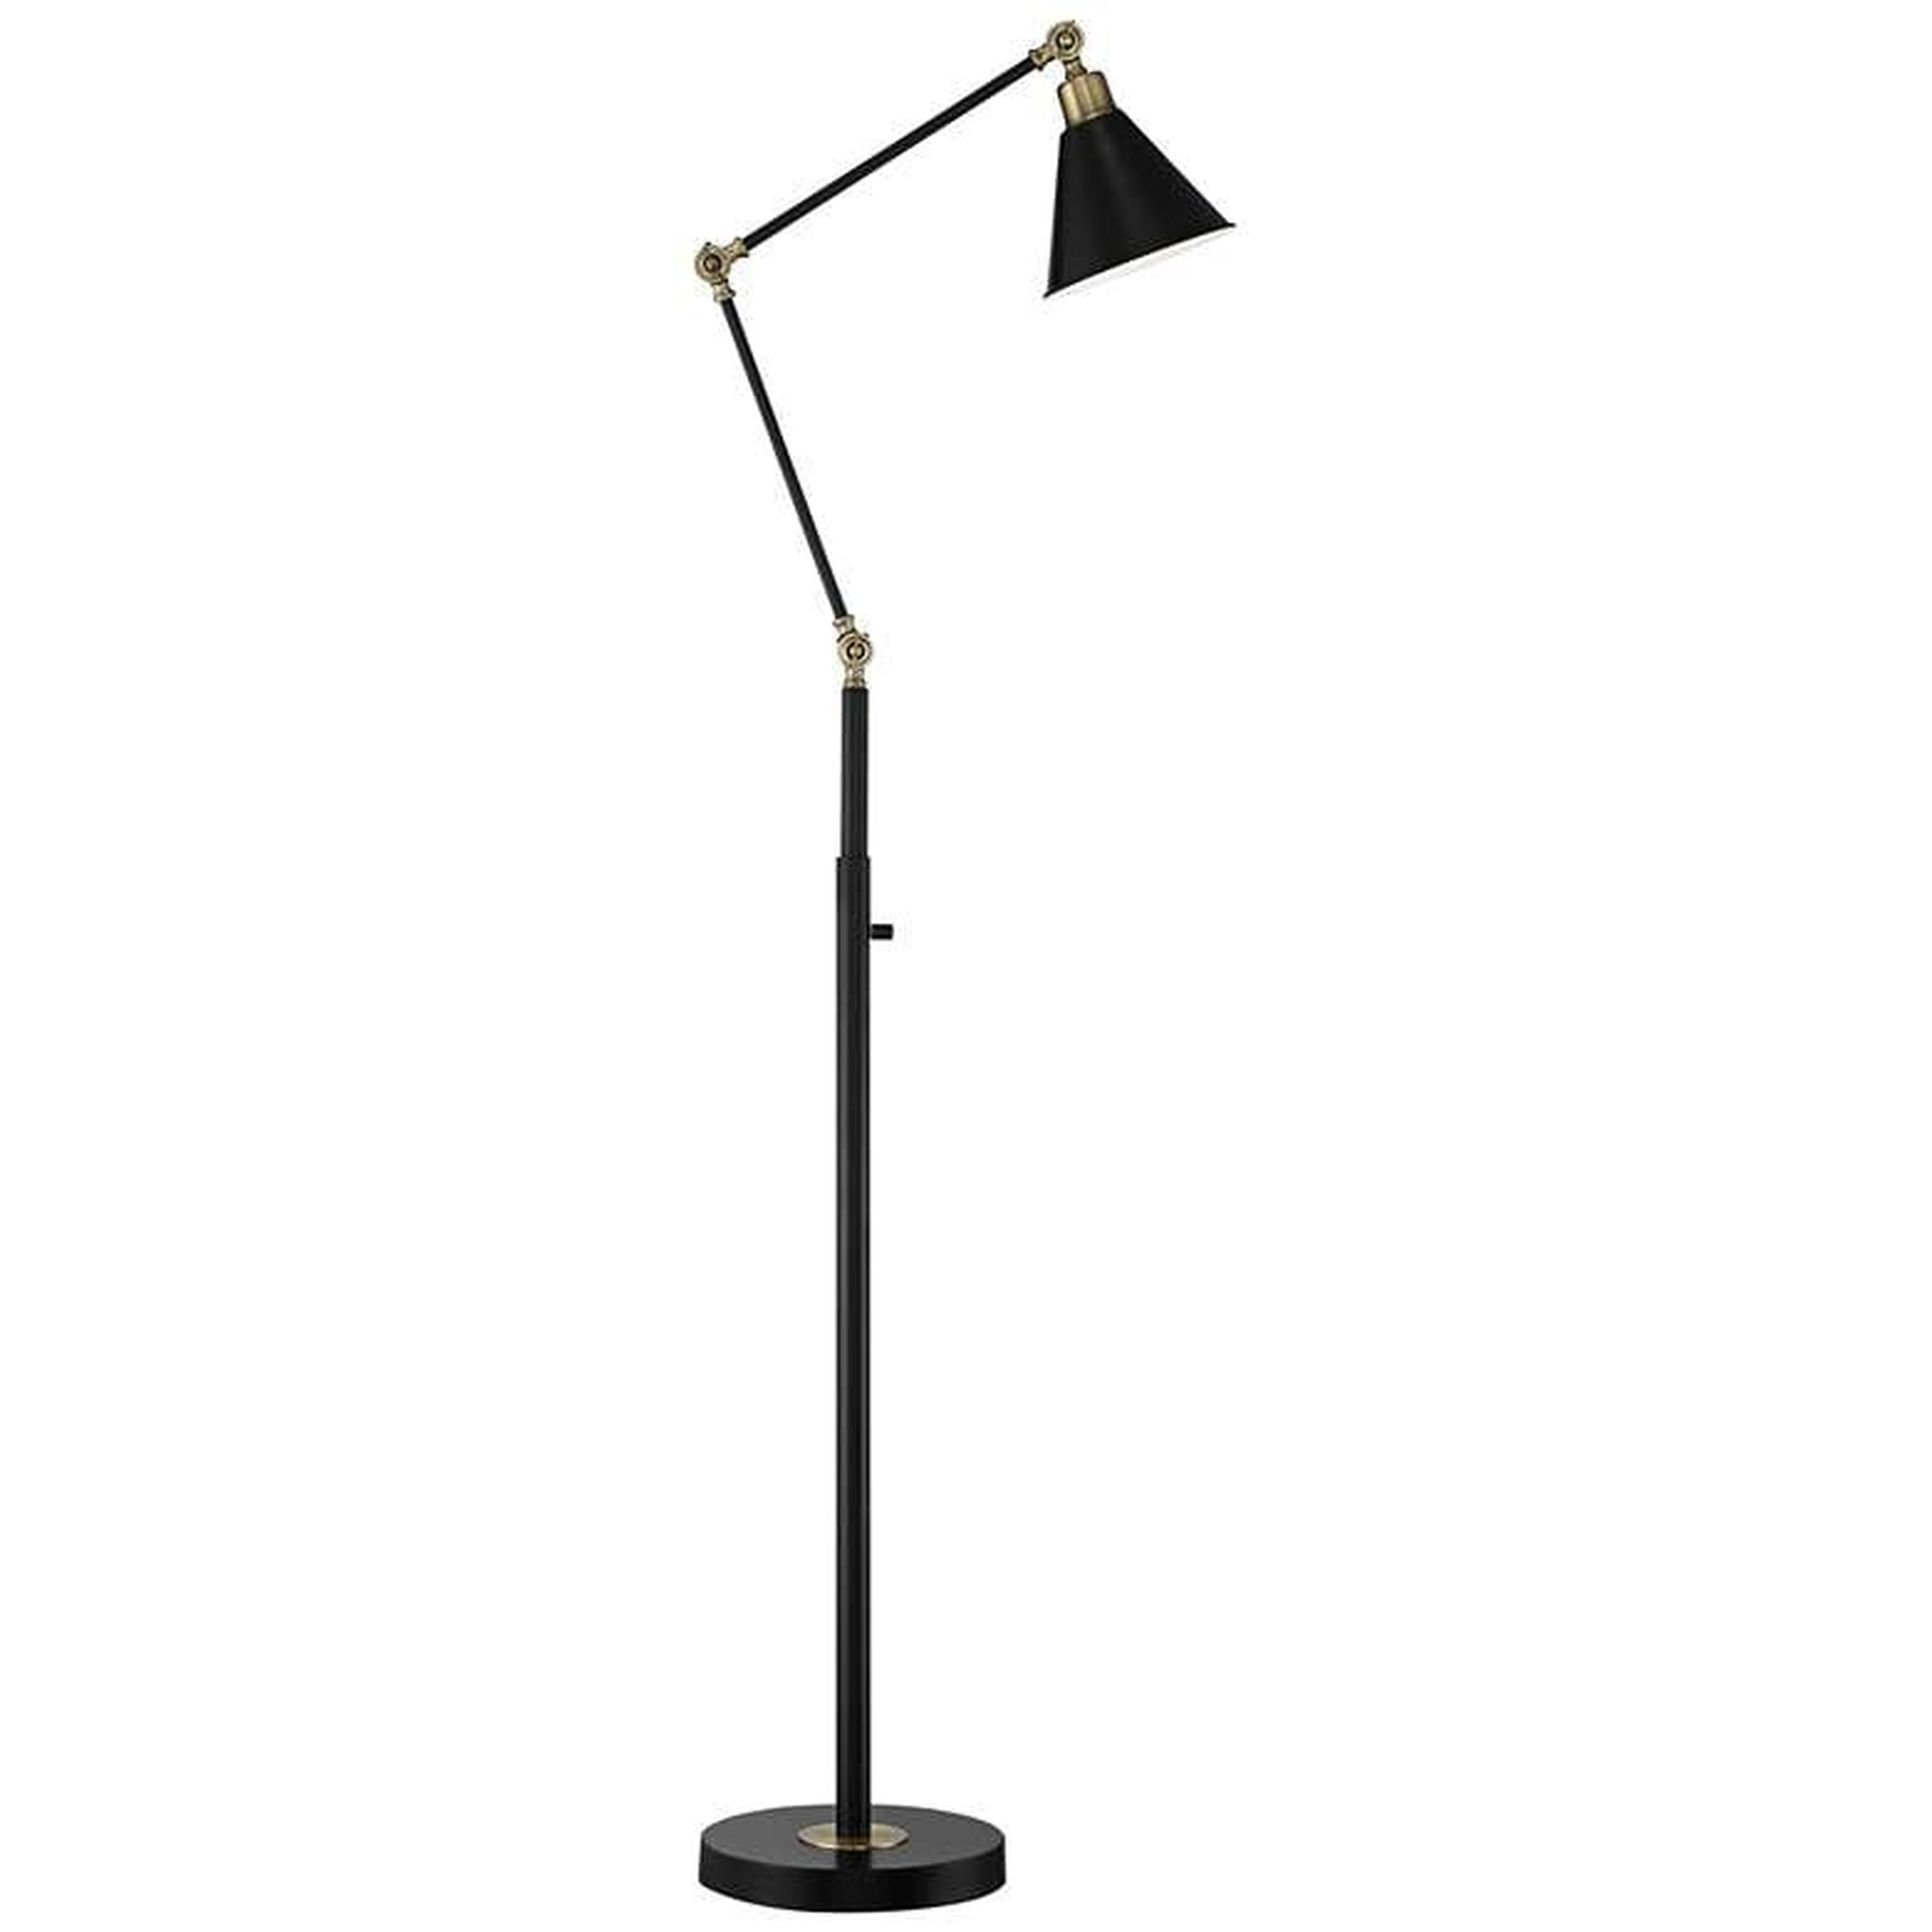 Wray Black and Antique Brass Adjustable Floor Lamp - Lamps Plus